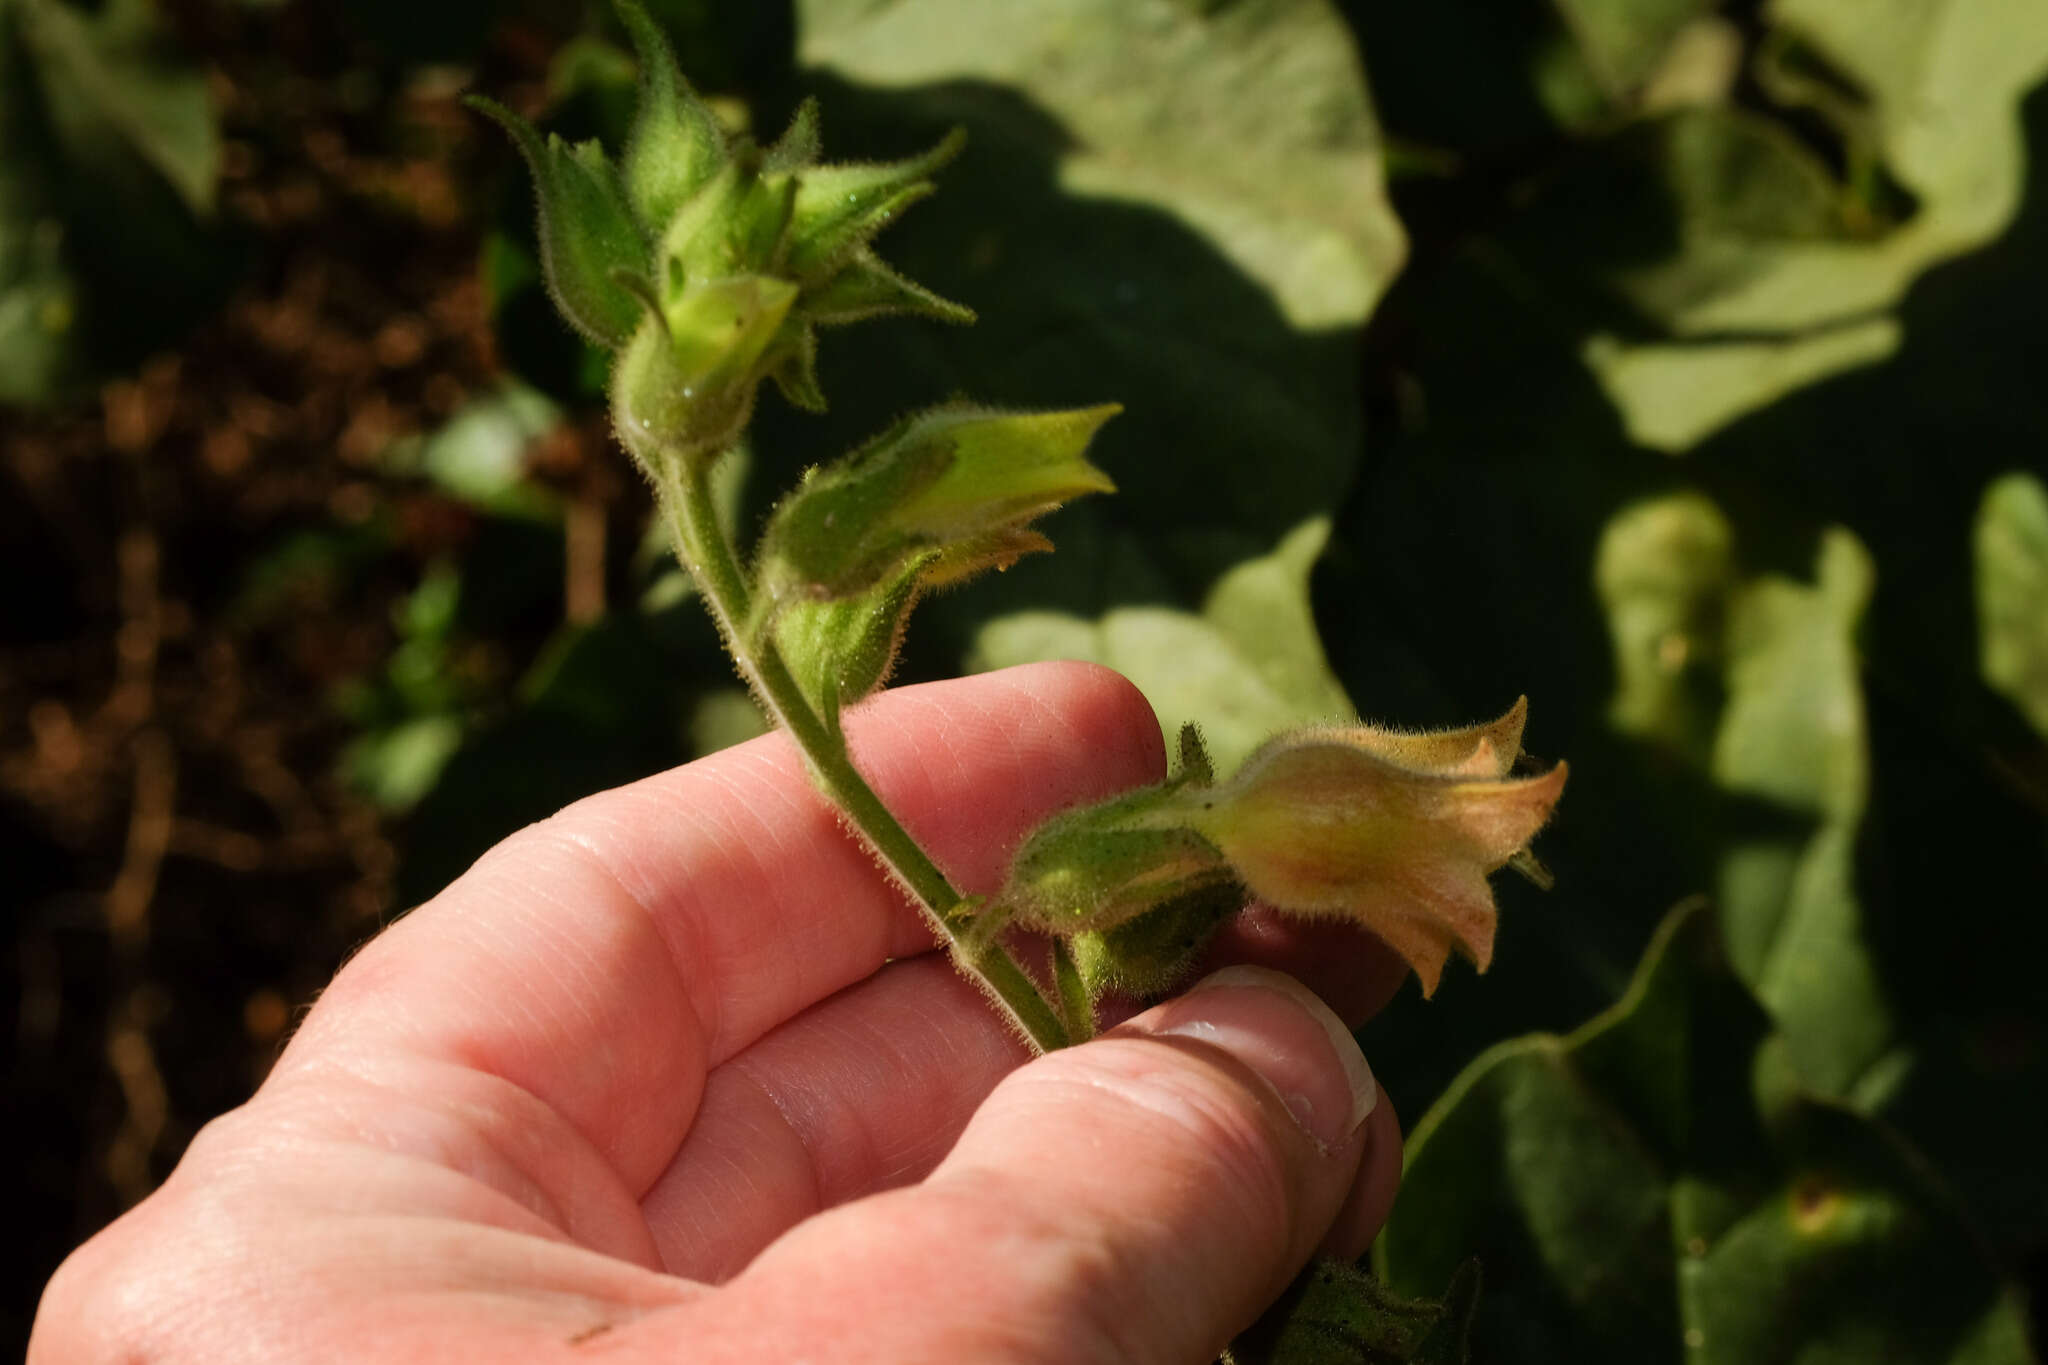 Image of tobacco